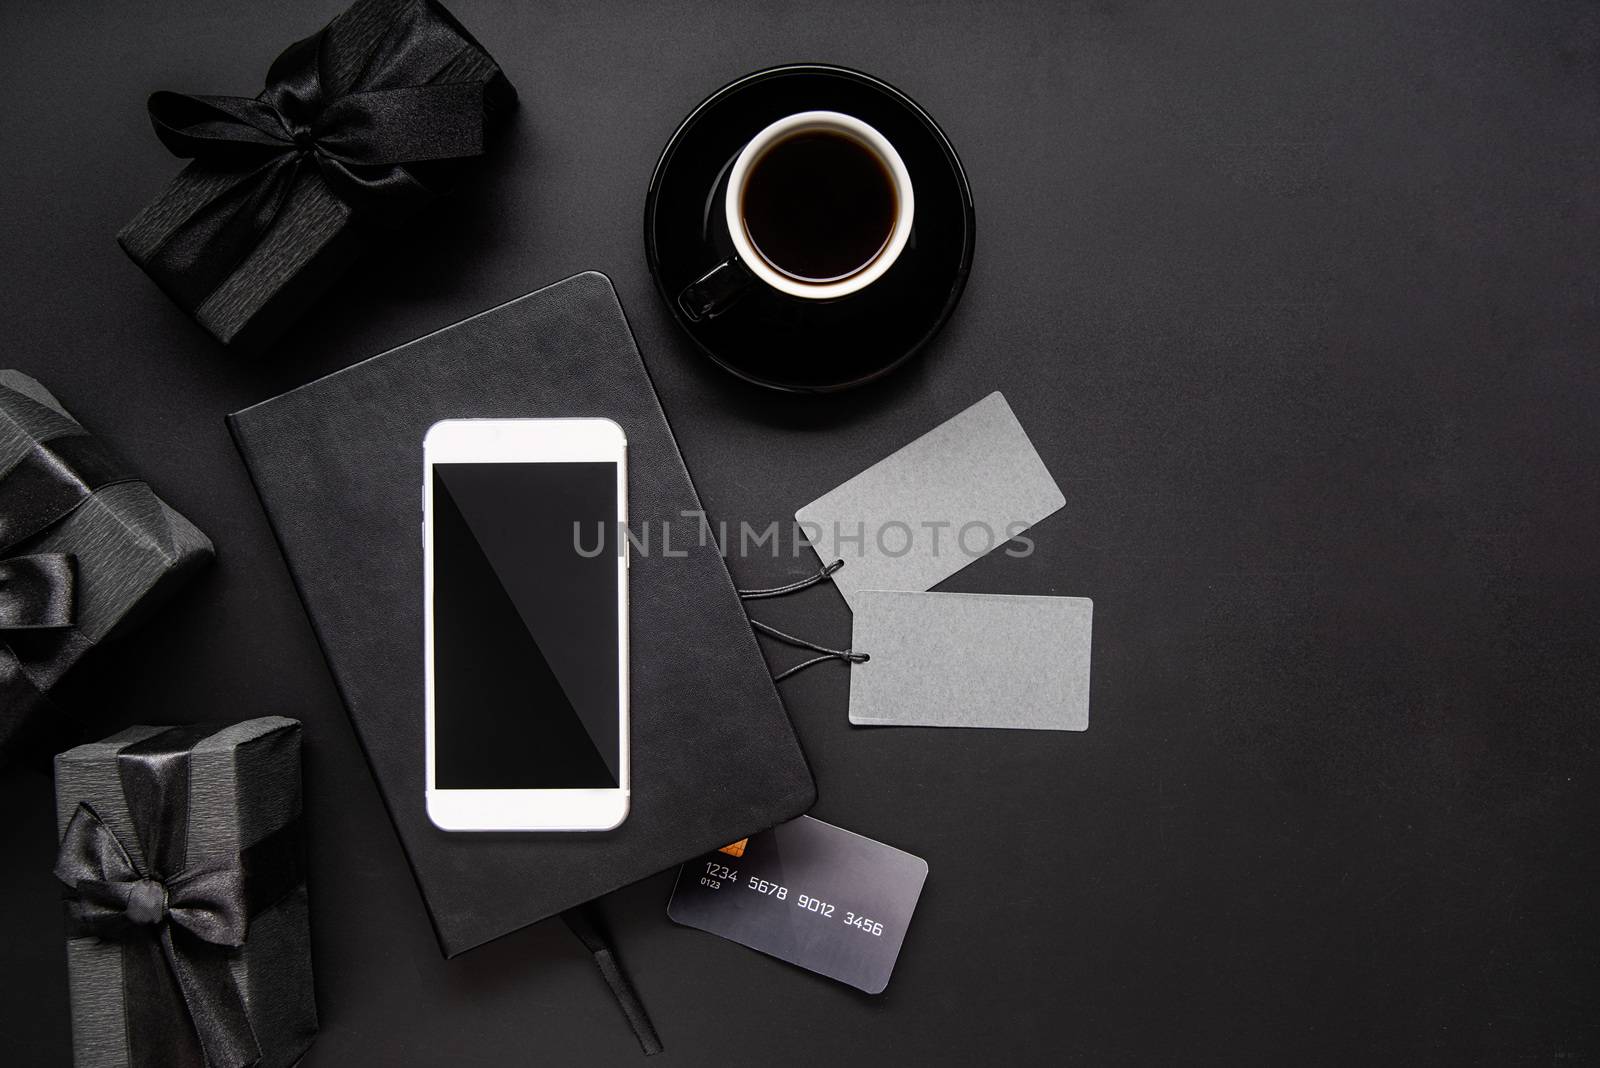 Black Friday shopping sale concept. Black smartphone, price tags, coffee and gifts top view flat lay on black background with copy space